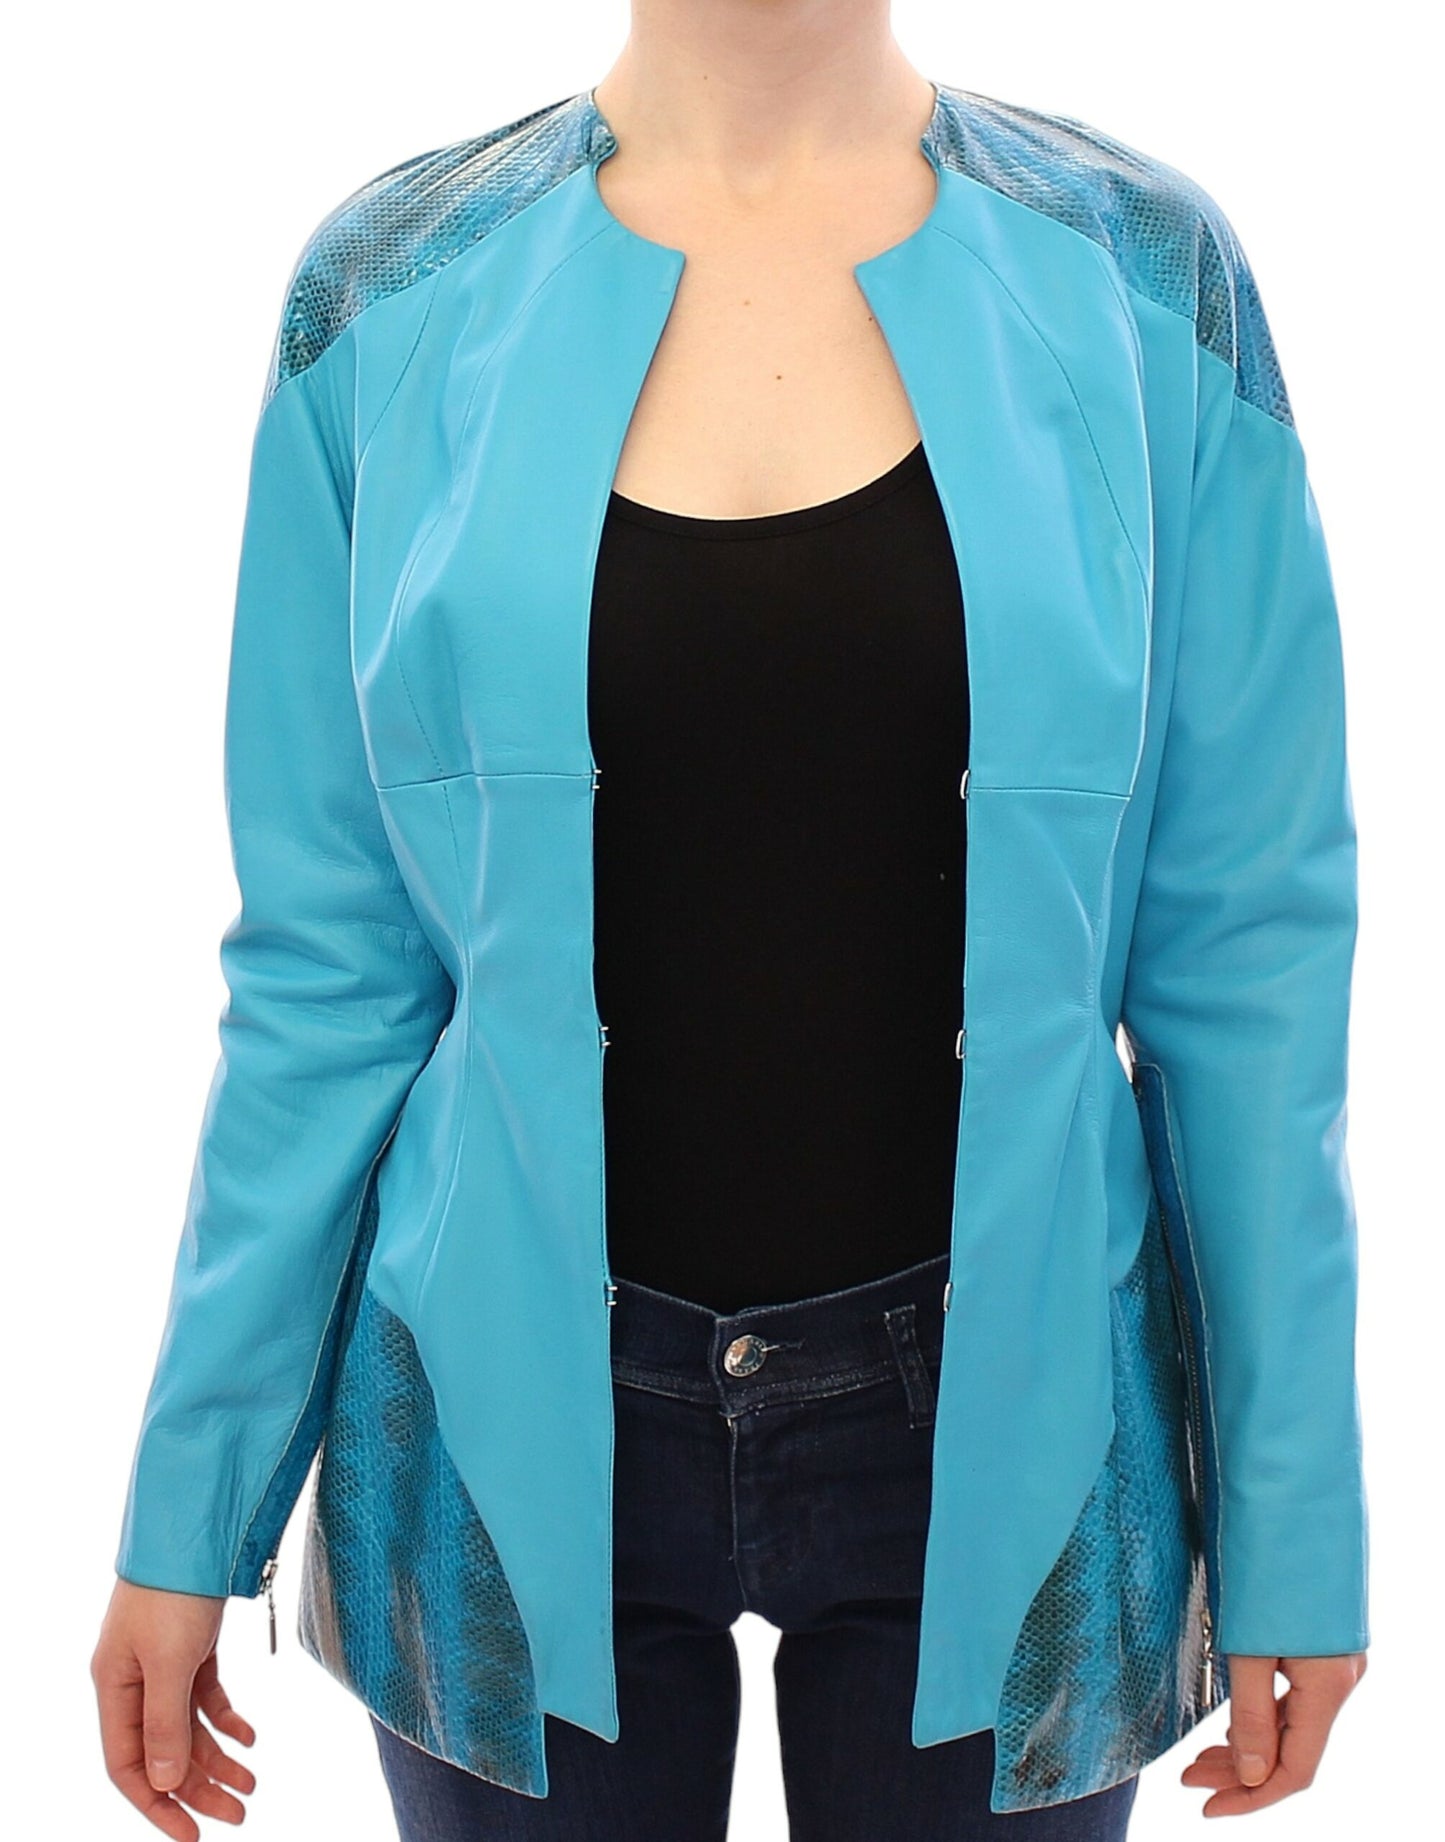 Vladimiro Gioia Exquisite Blue Leather Jacket with Snake Print Detail